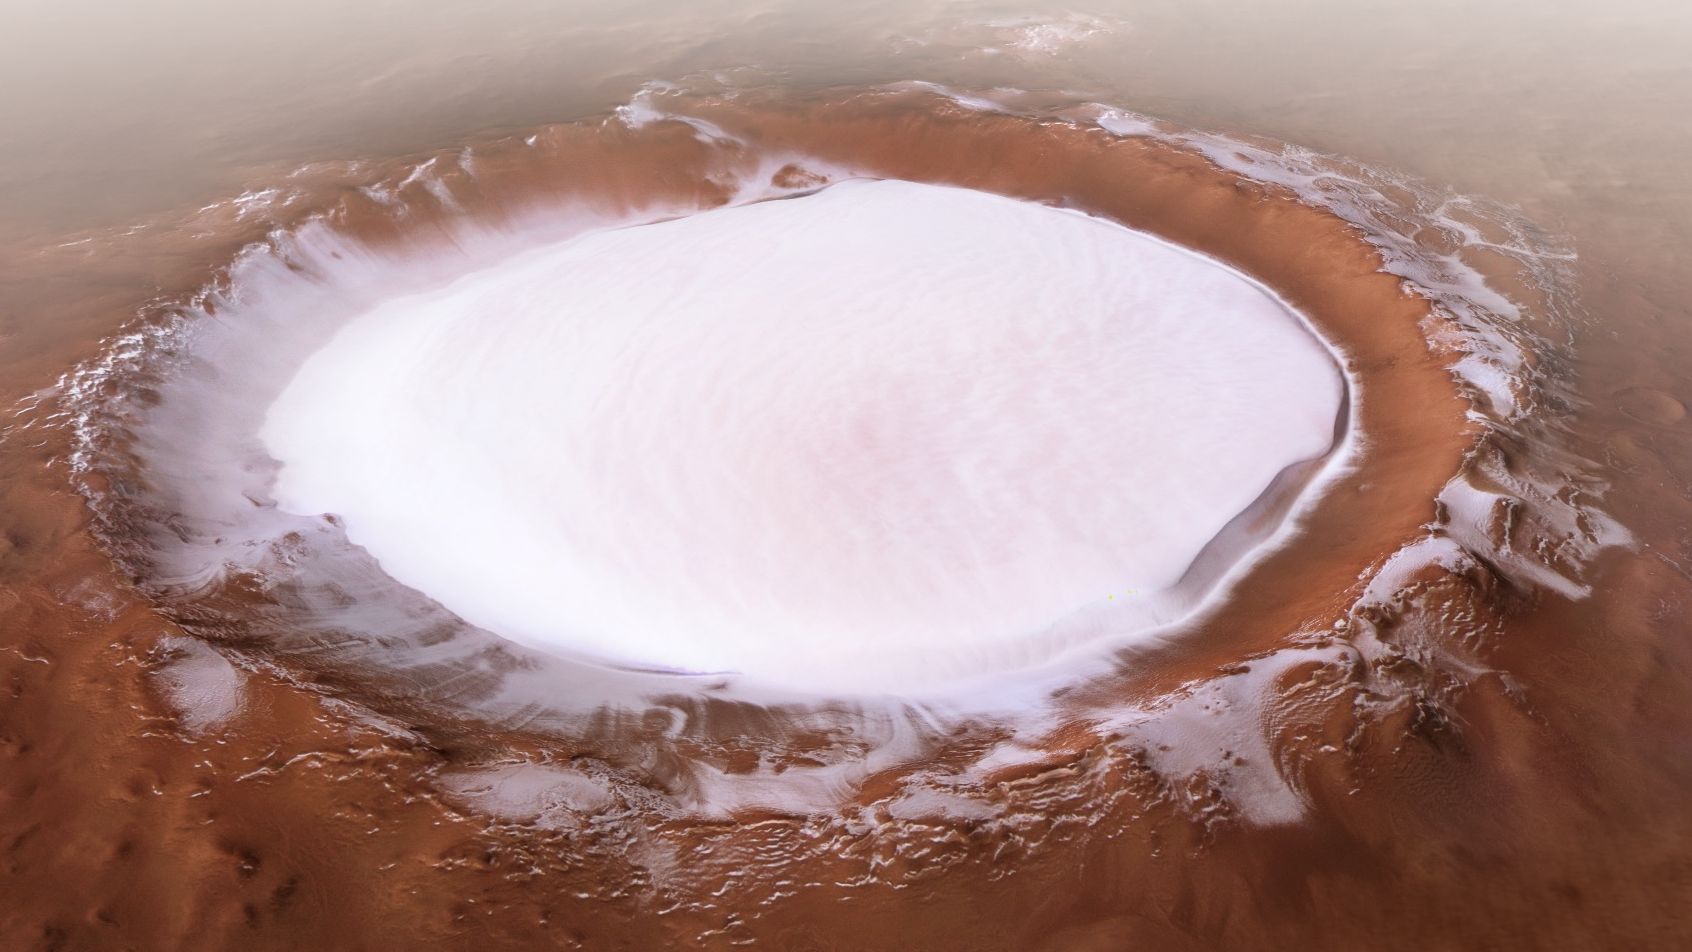 Ice can be found in multiple places on the cold planet. The European Space Agency's Mars Express mission captured this image of the Korolev crater, more than 50 miles across and filled with water ice, near the north pole.